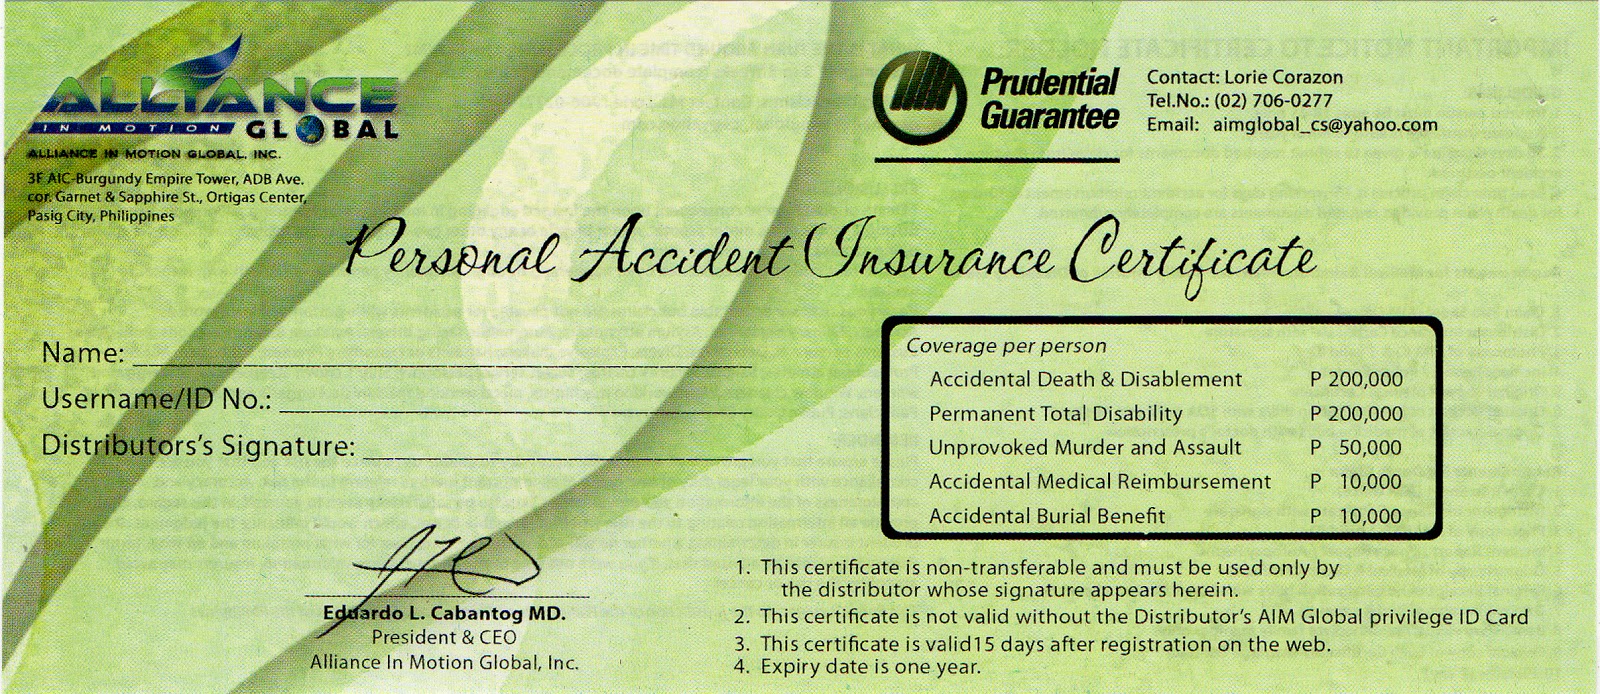 Certificate is not valid. Accidental Death benefit логотип. Validity 15/7. Accidental Death benefit logo.